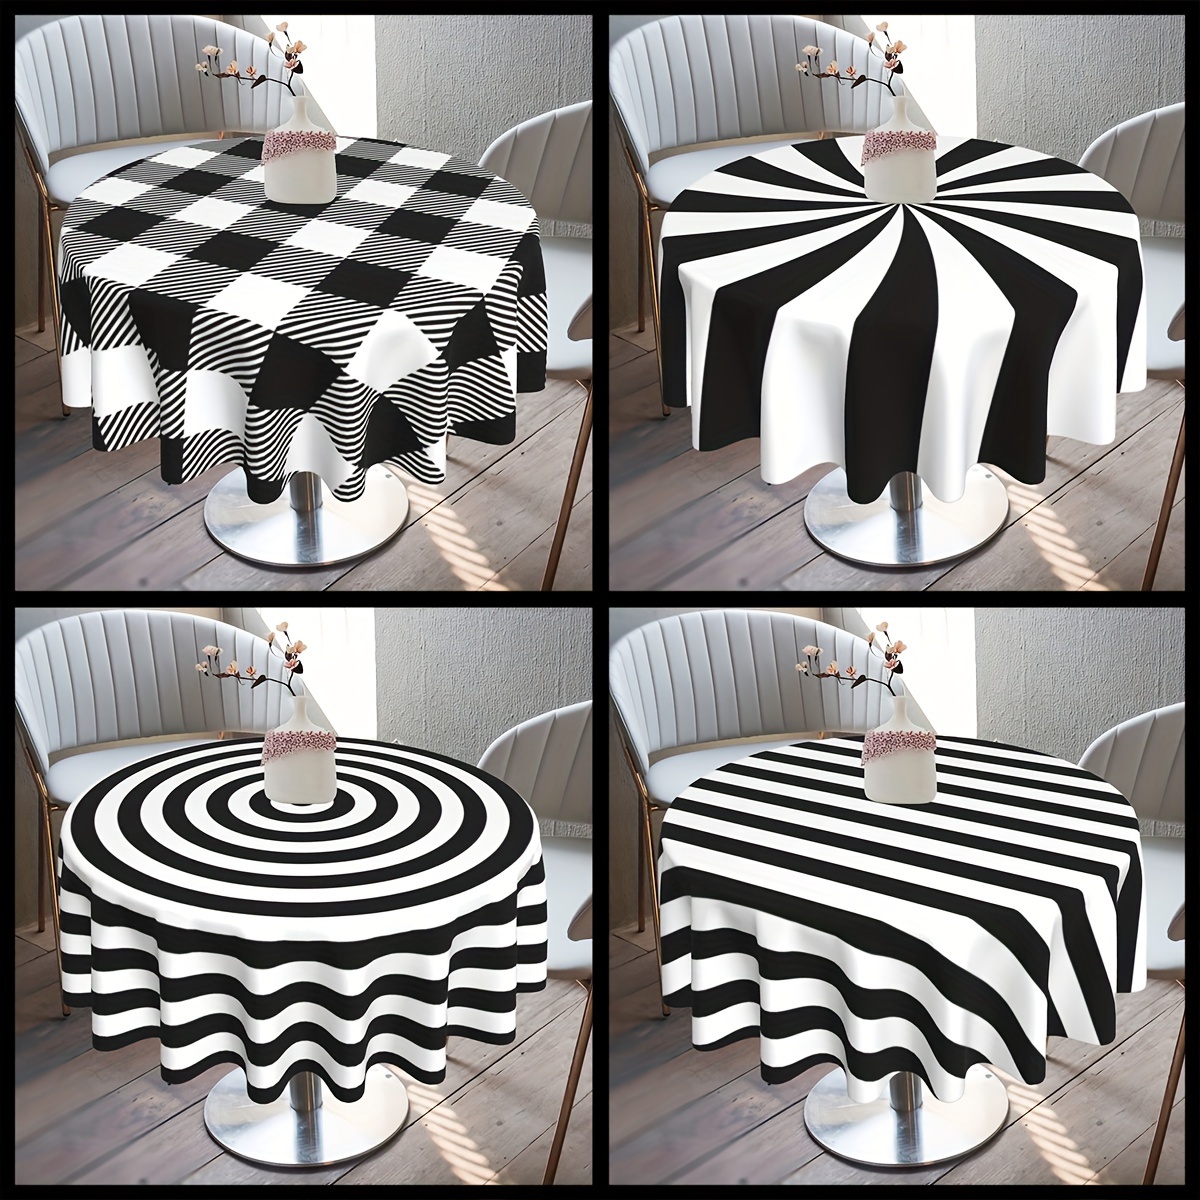 

Chic Black & White Striped Round Tablecloth - 60" Diameter, Wrinkle-resistant Polyester Cover For Home, Kitchen, Dining Room Decor